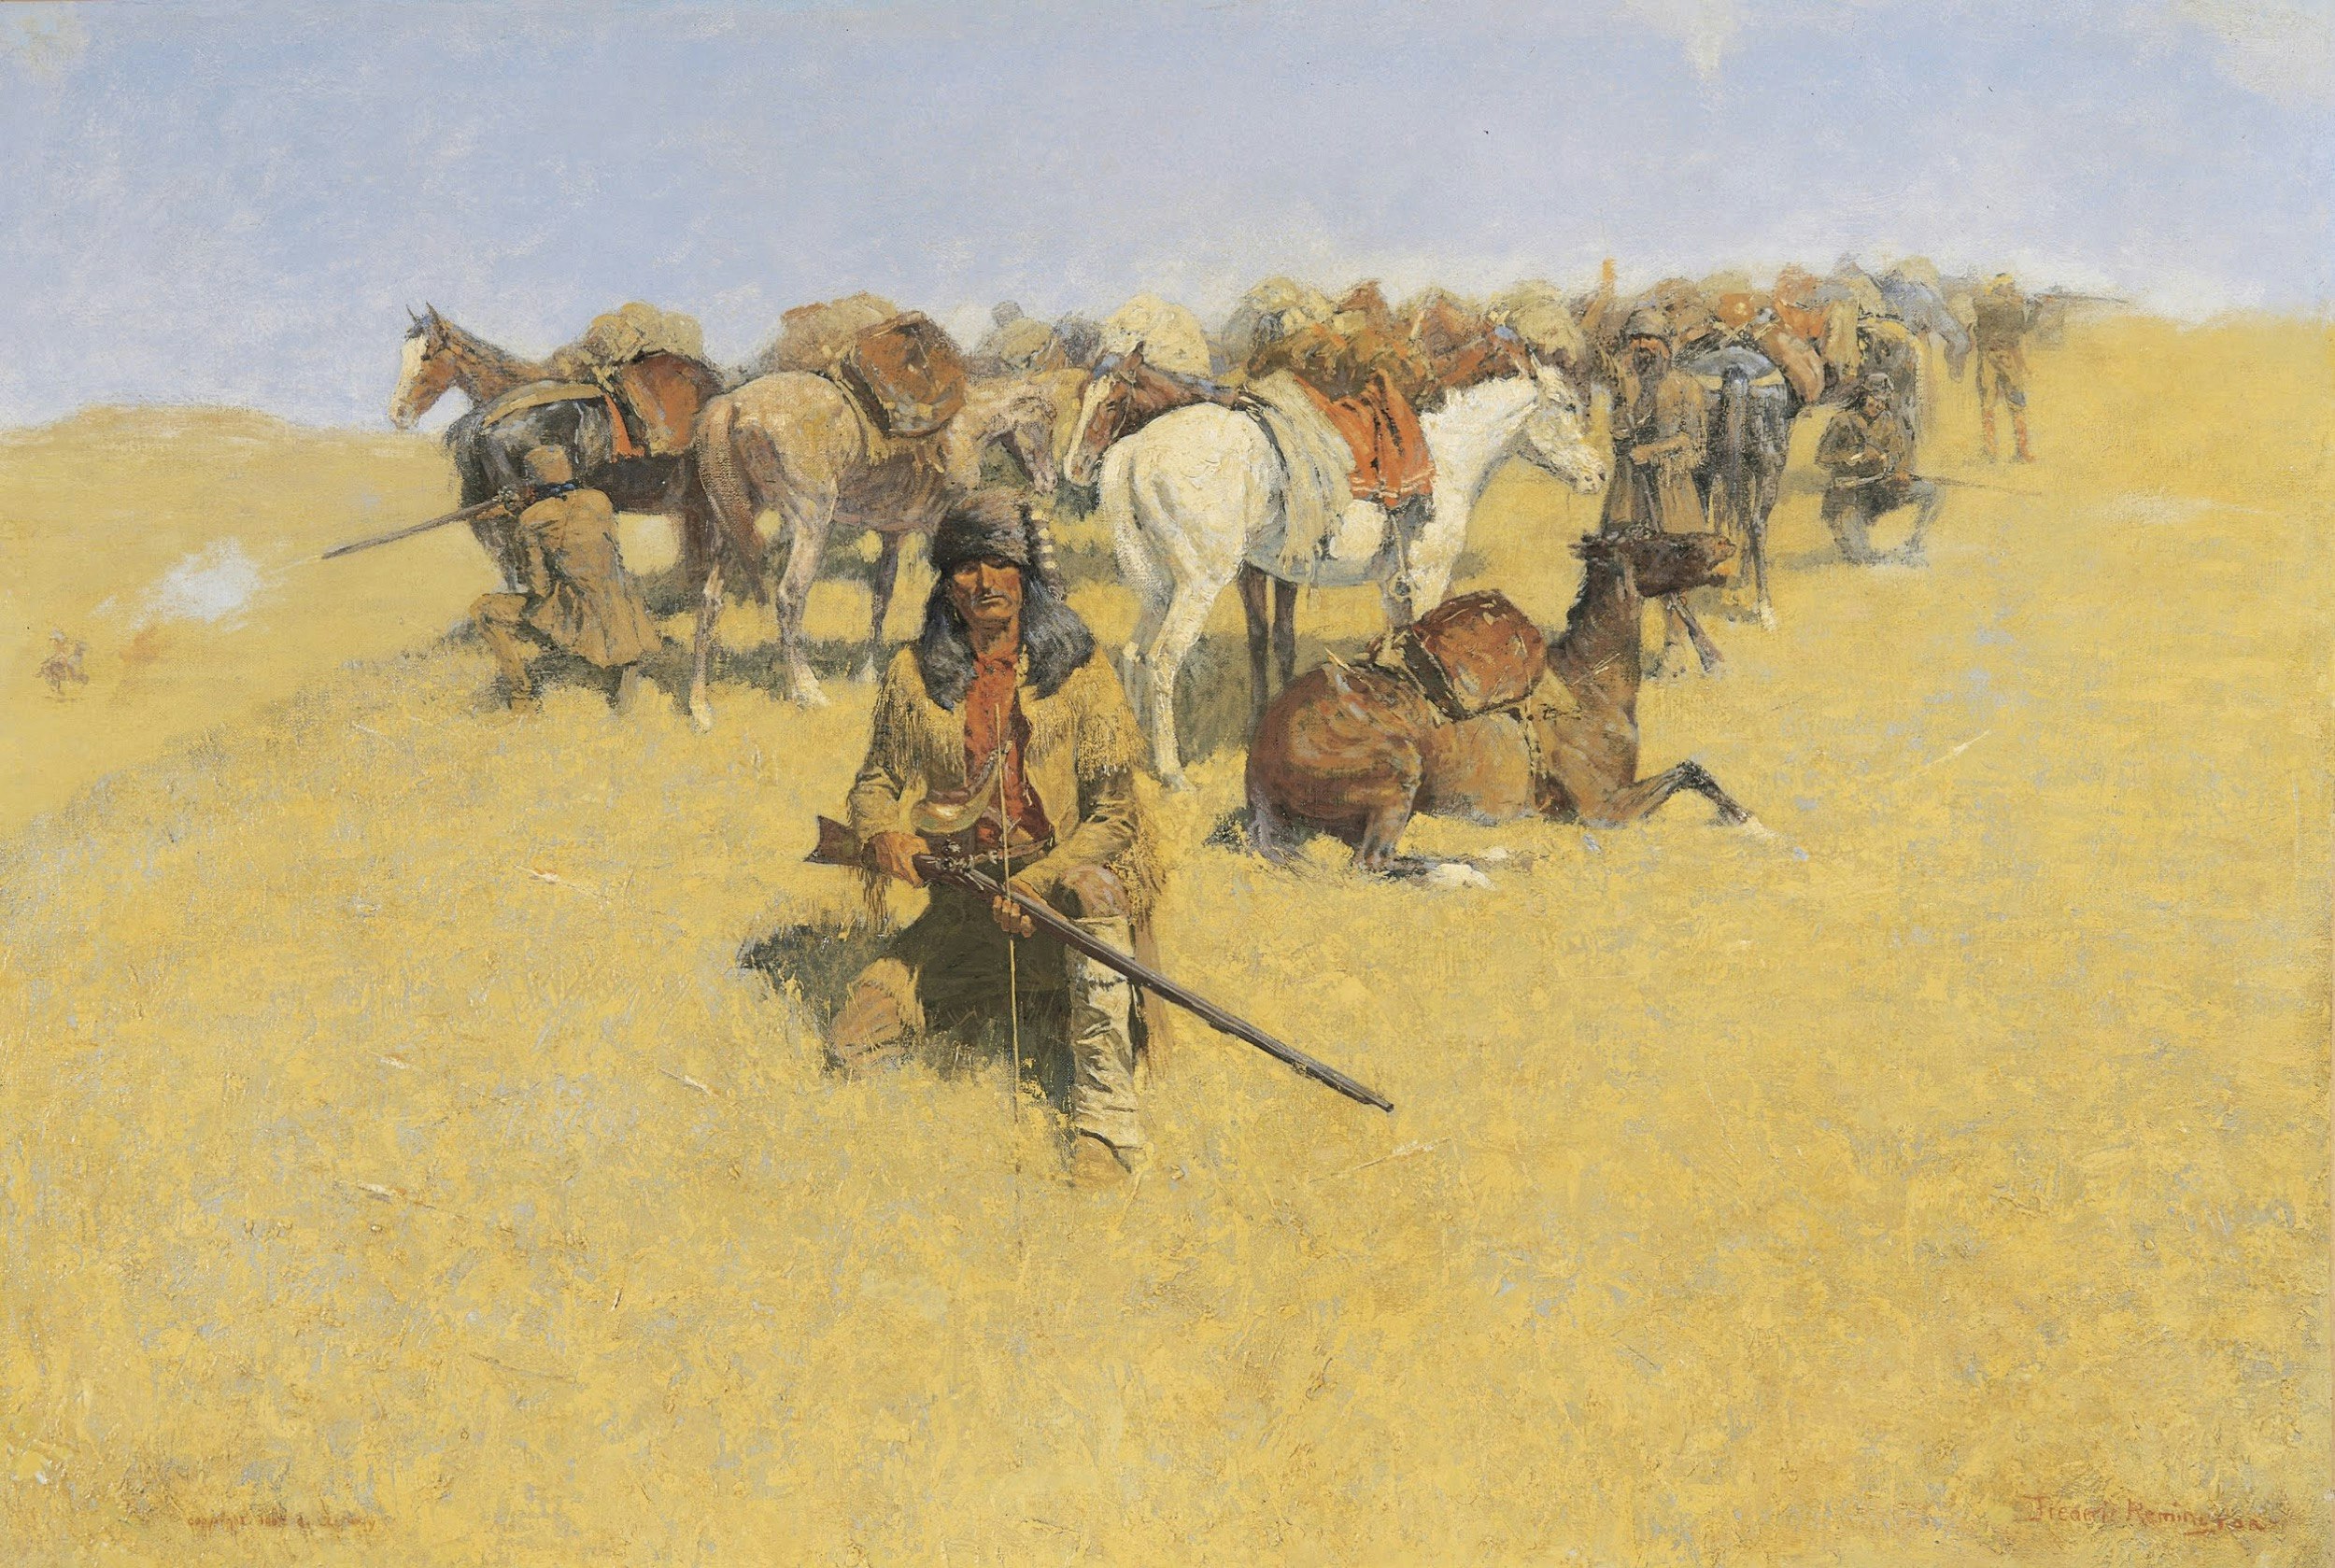 ‘An Old-Time Plains Fight,’ depicts a small band of plains fighters who look like they're surrounded in a yellow field; Where to see Remington in America